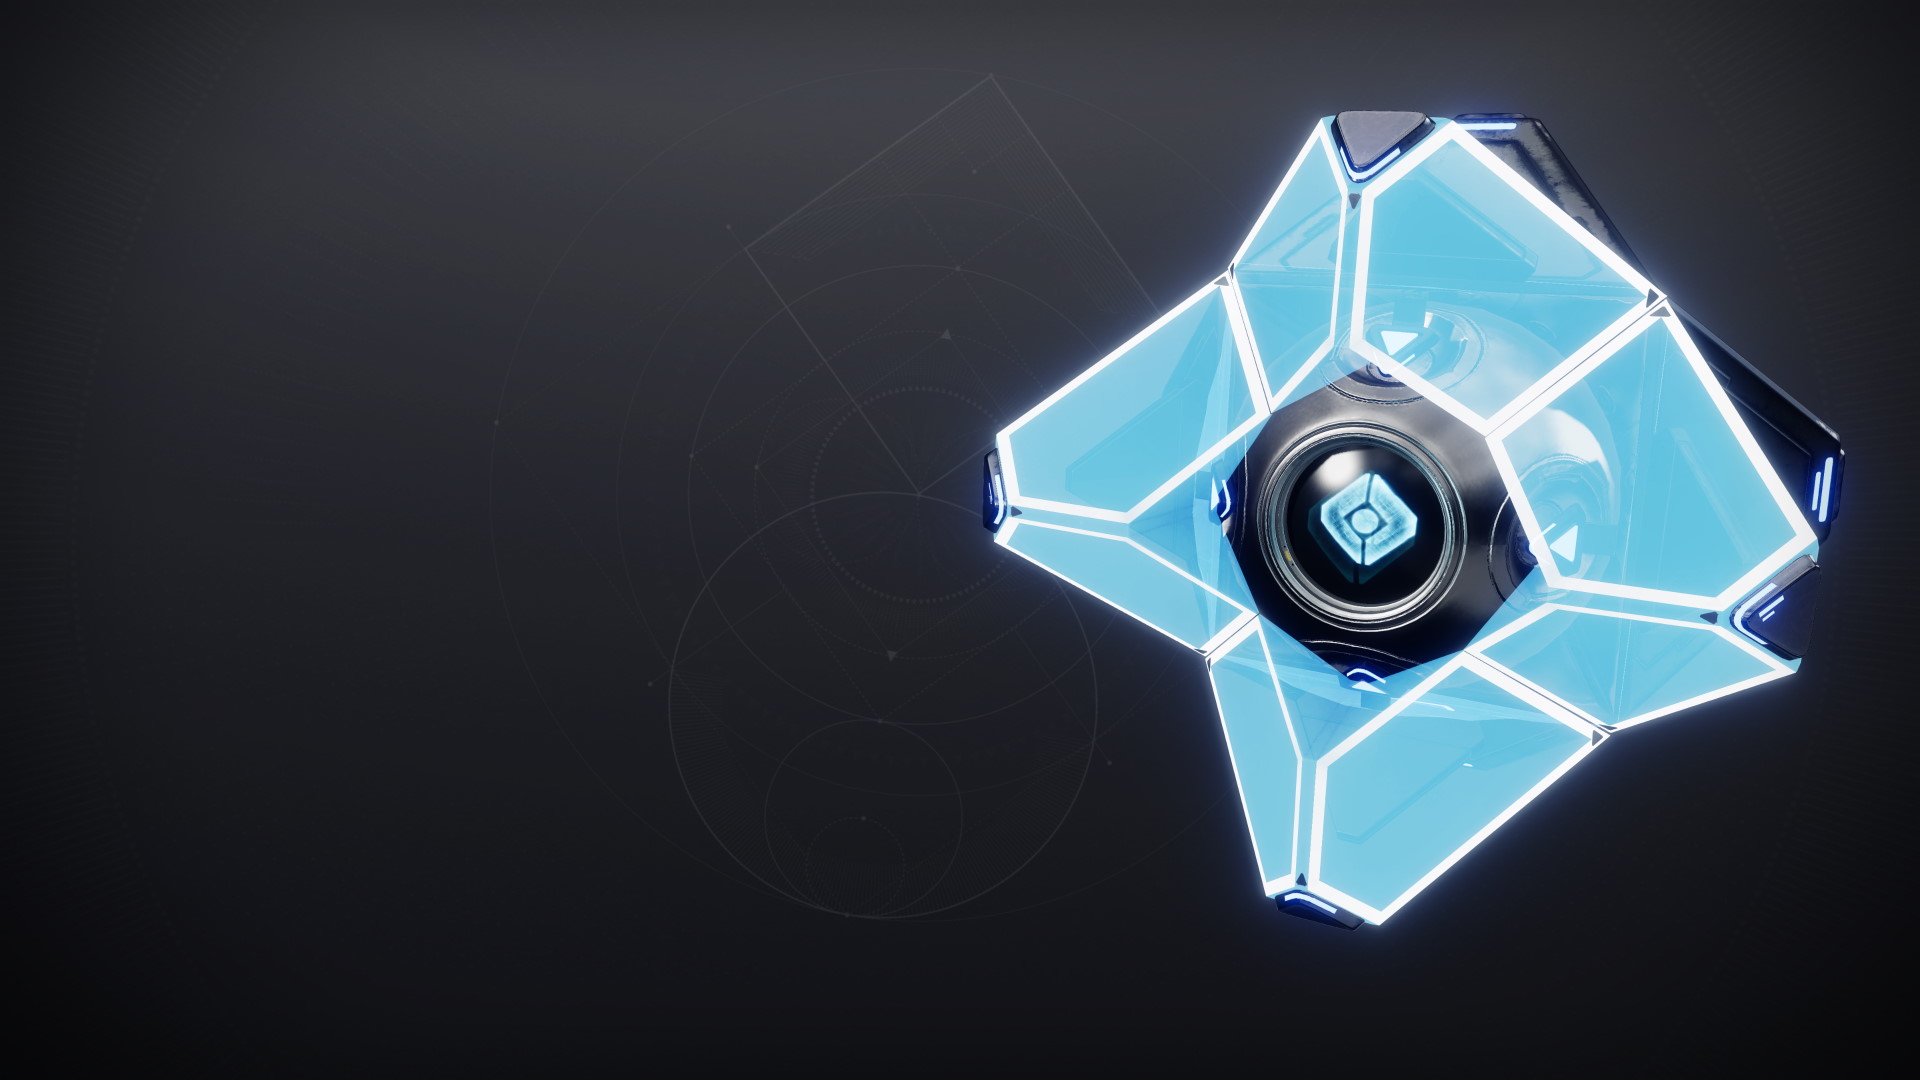 An in-game render of the Bright Cycle Shell.